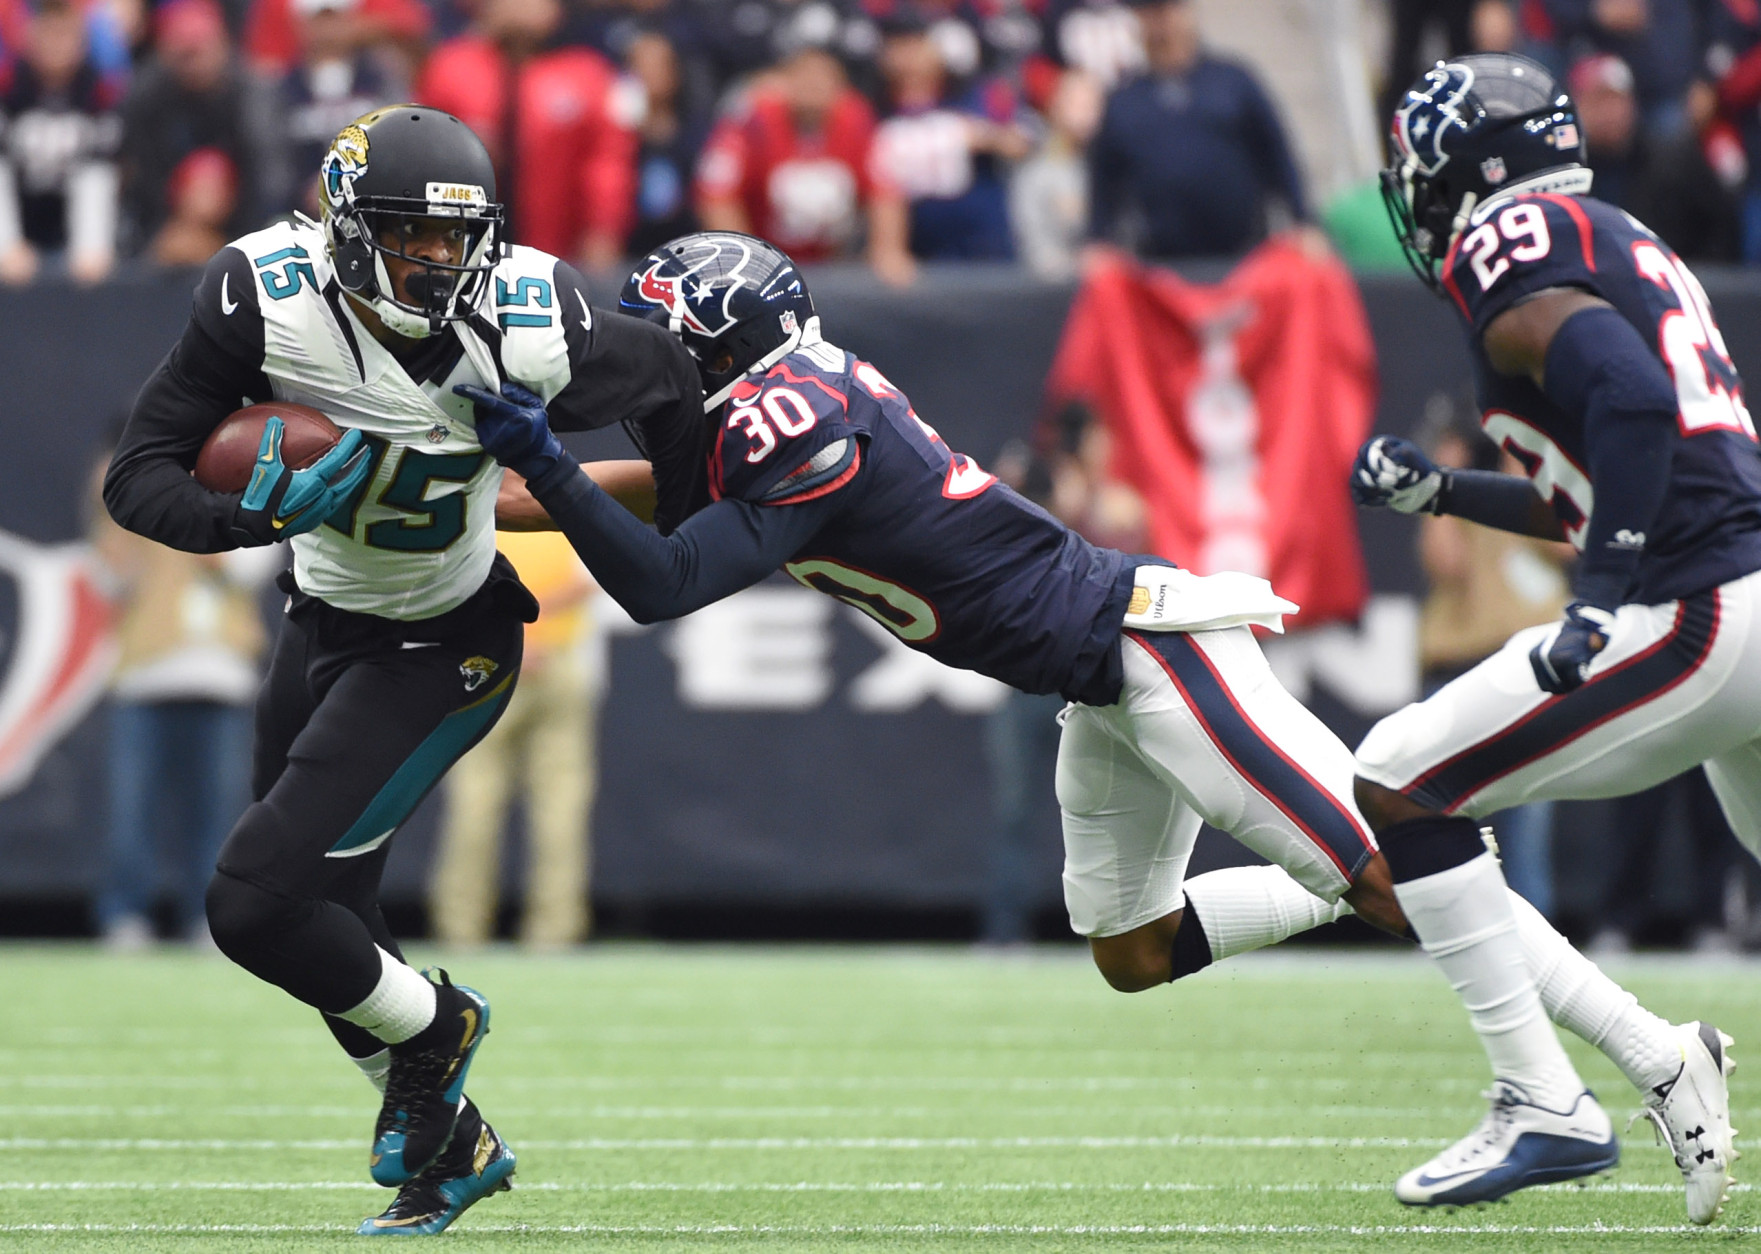 Jacksonville Jaguars wide receiver Allen Robinson (15) tries to break a tackle by Houston Texans strong safety Kevin Johnson (30) during the first half of an NFL football game Sunday, Jan. 3, 2016, in Houston. (AP Photo/Eric Christian Smith)